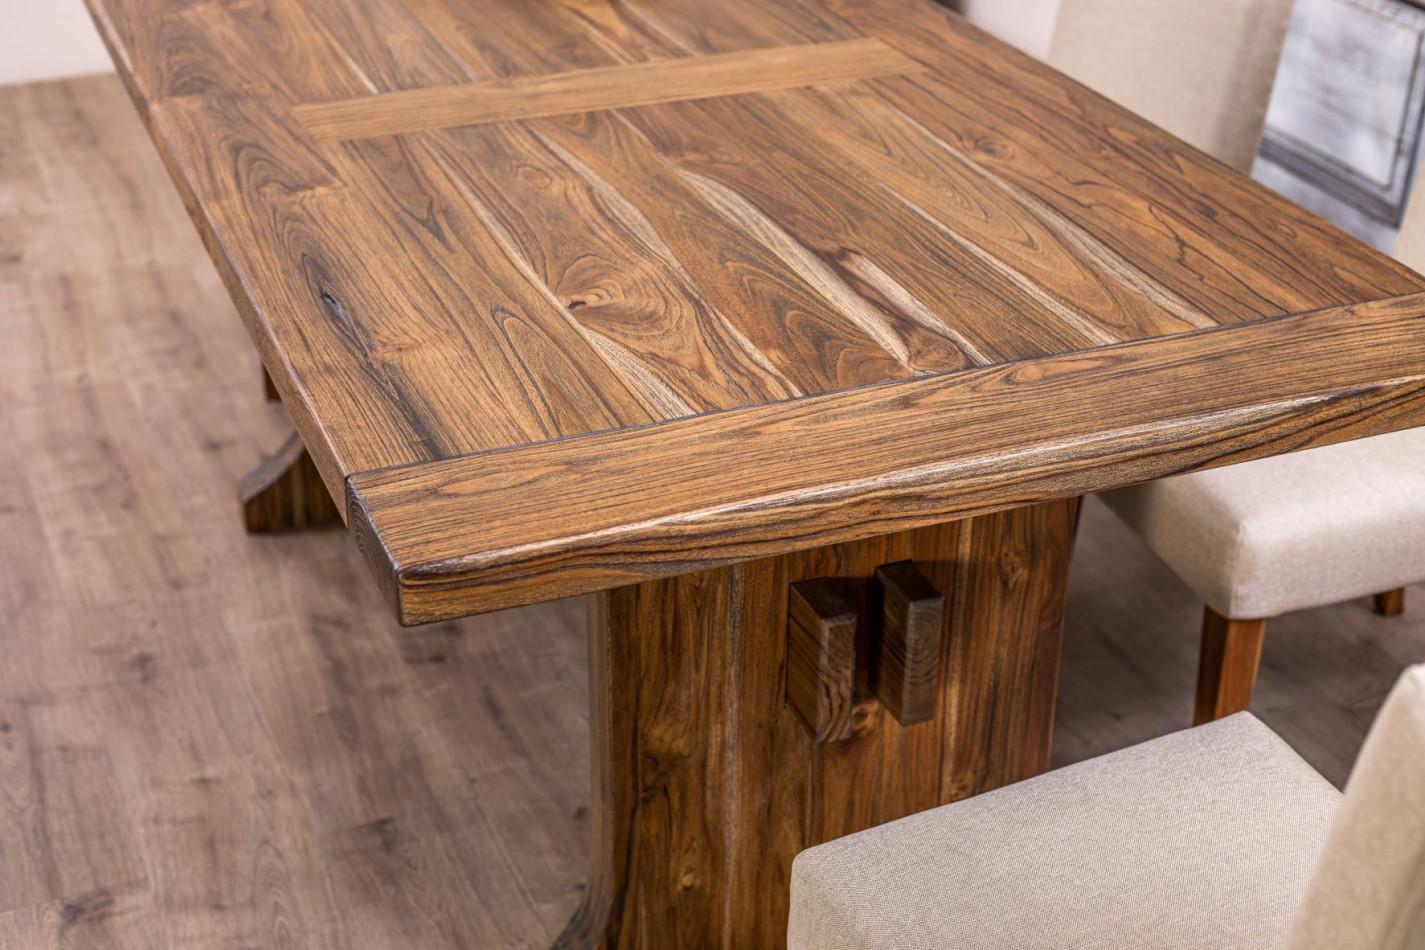 A gorgeous trestle table that provides a lovely foundation for family dinners. Using century-old joinery techniques, the 100% solid natural wood table provides a focal piece that can be handed down for generations.

The Table Company makes only 100%